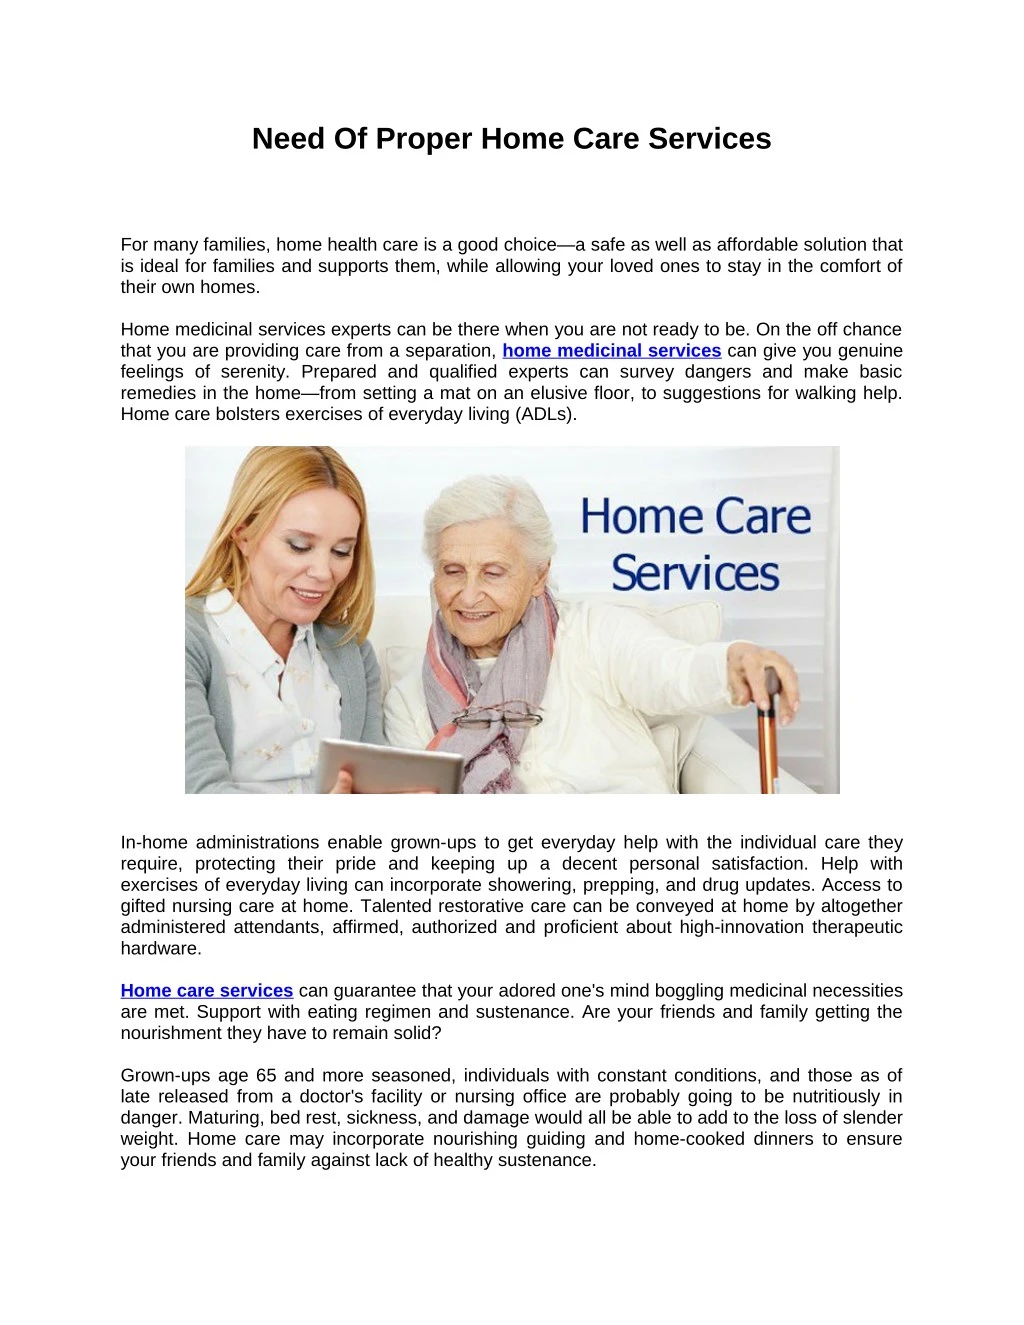 need of proper home care services